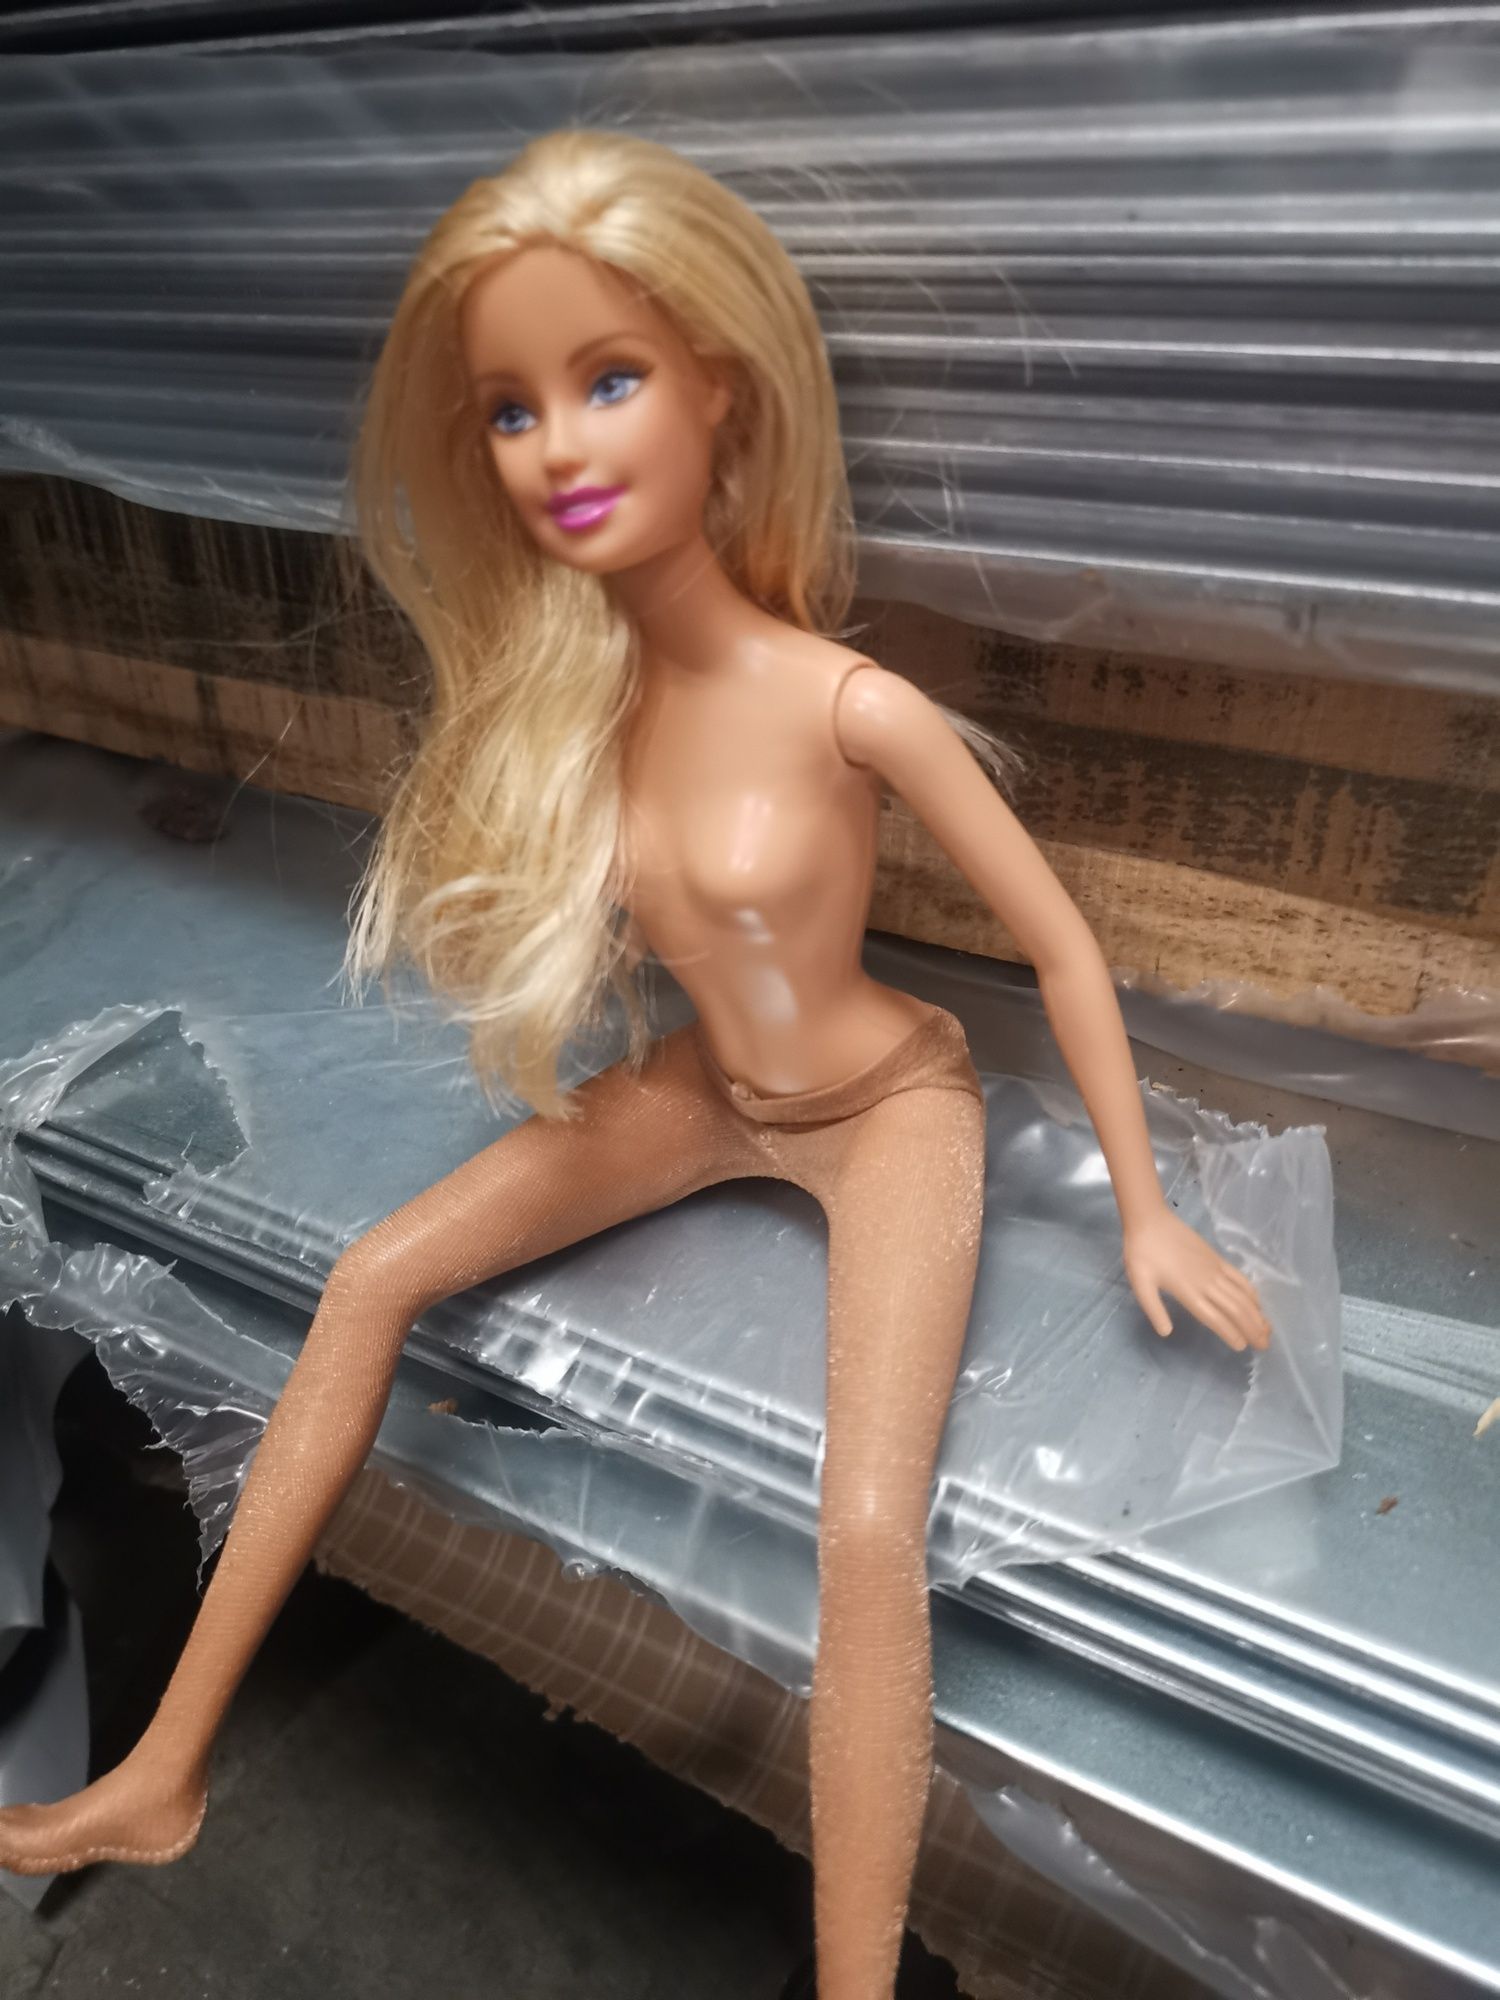 Sexy Barbie doll pantyhose at work  #7